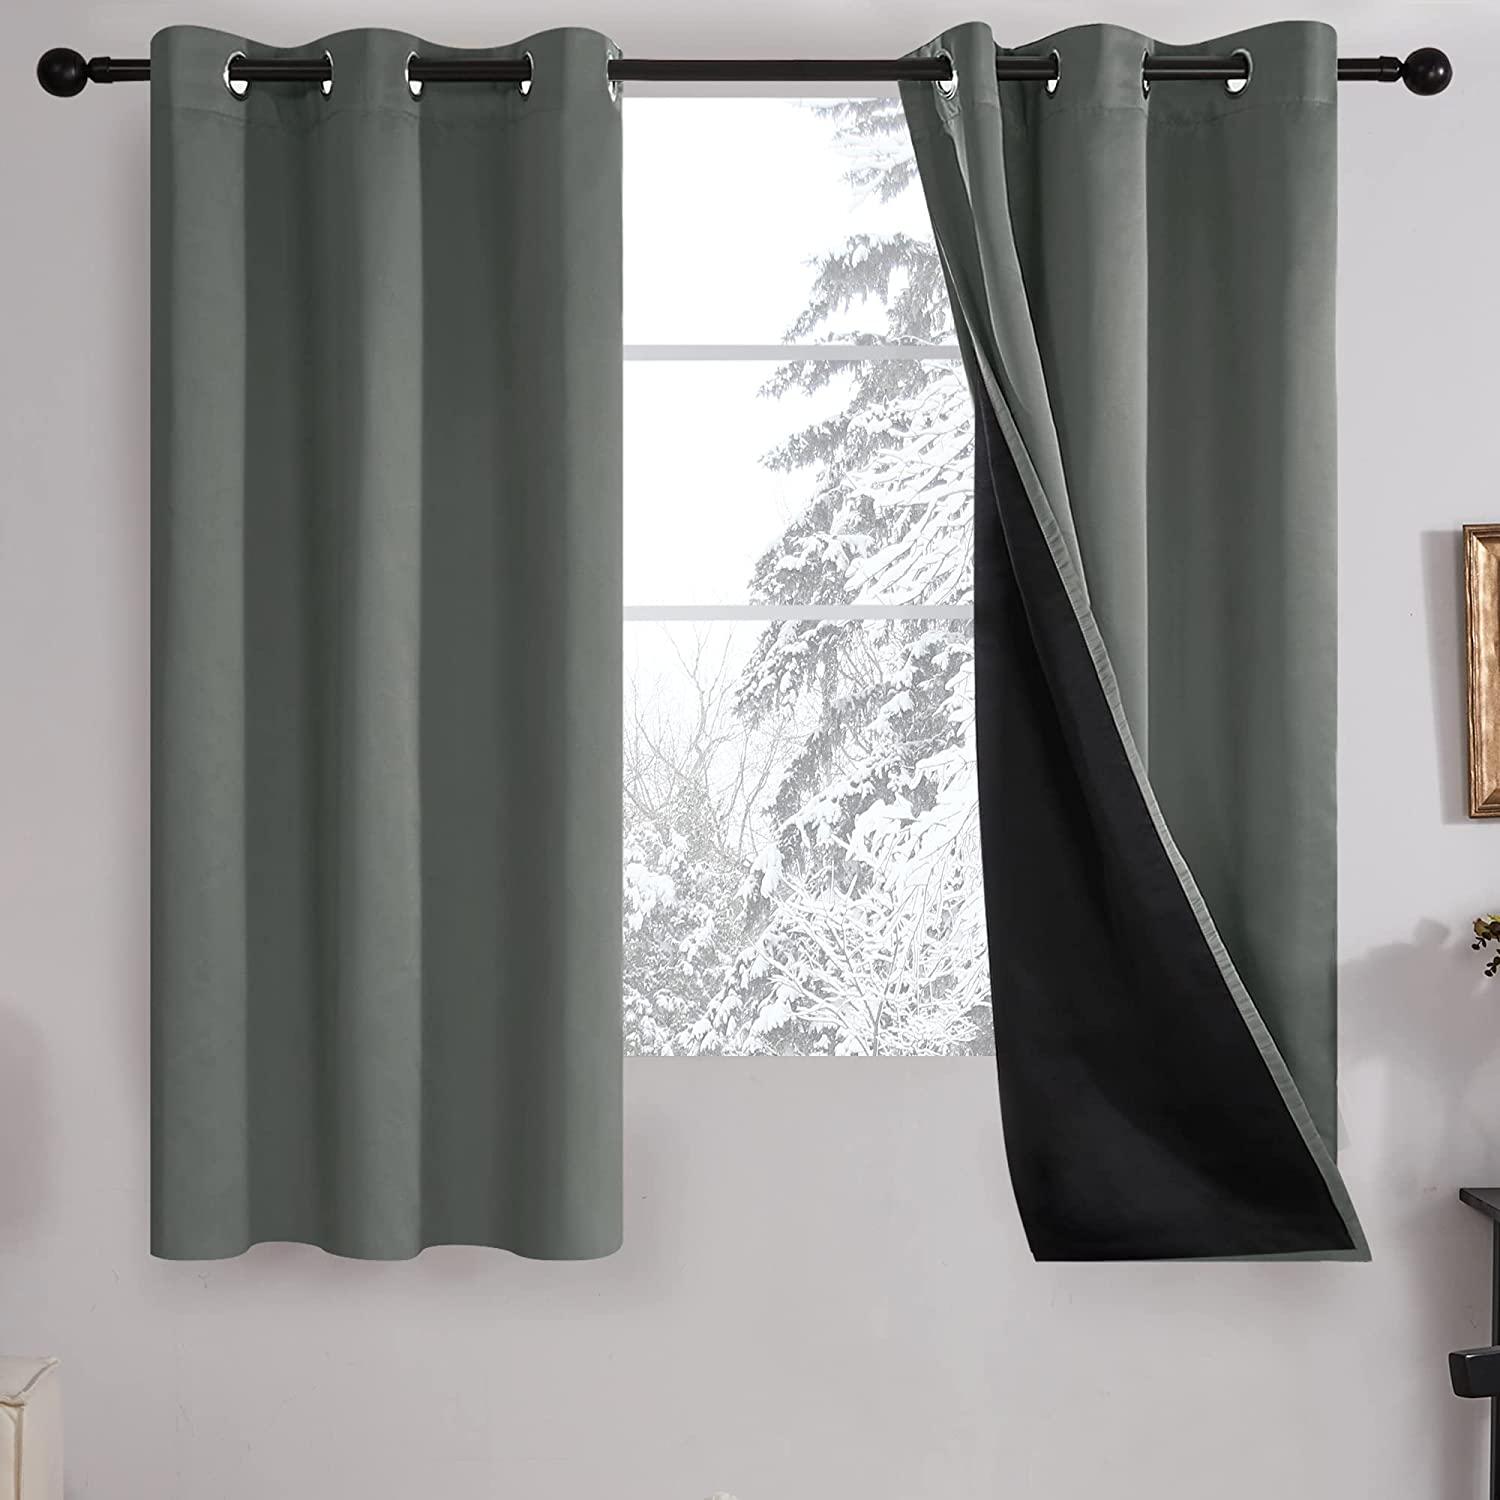 Deconovo Grommet Noise Reducing Total Blackout Curtains 2 Pack for $11.99